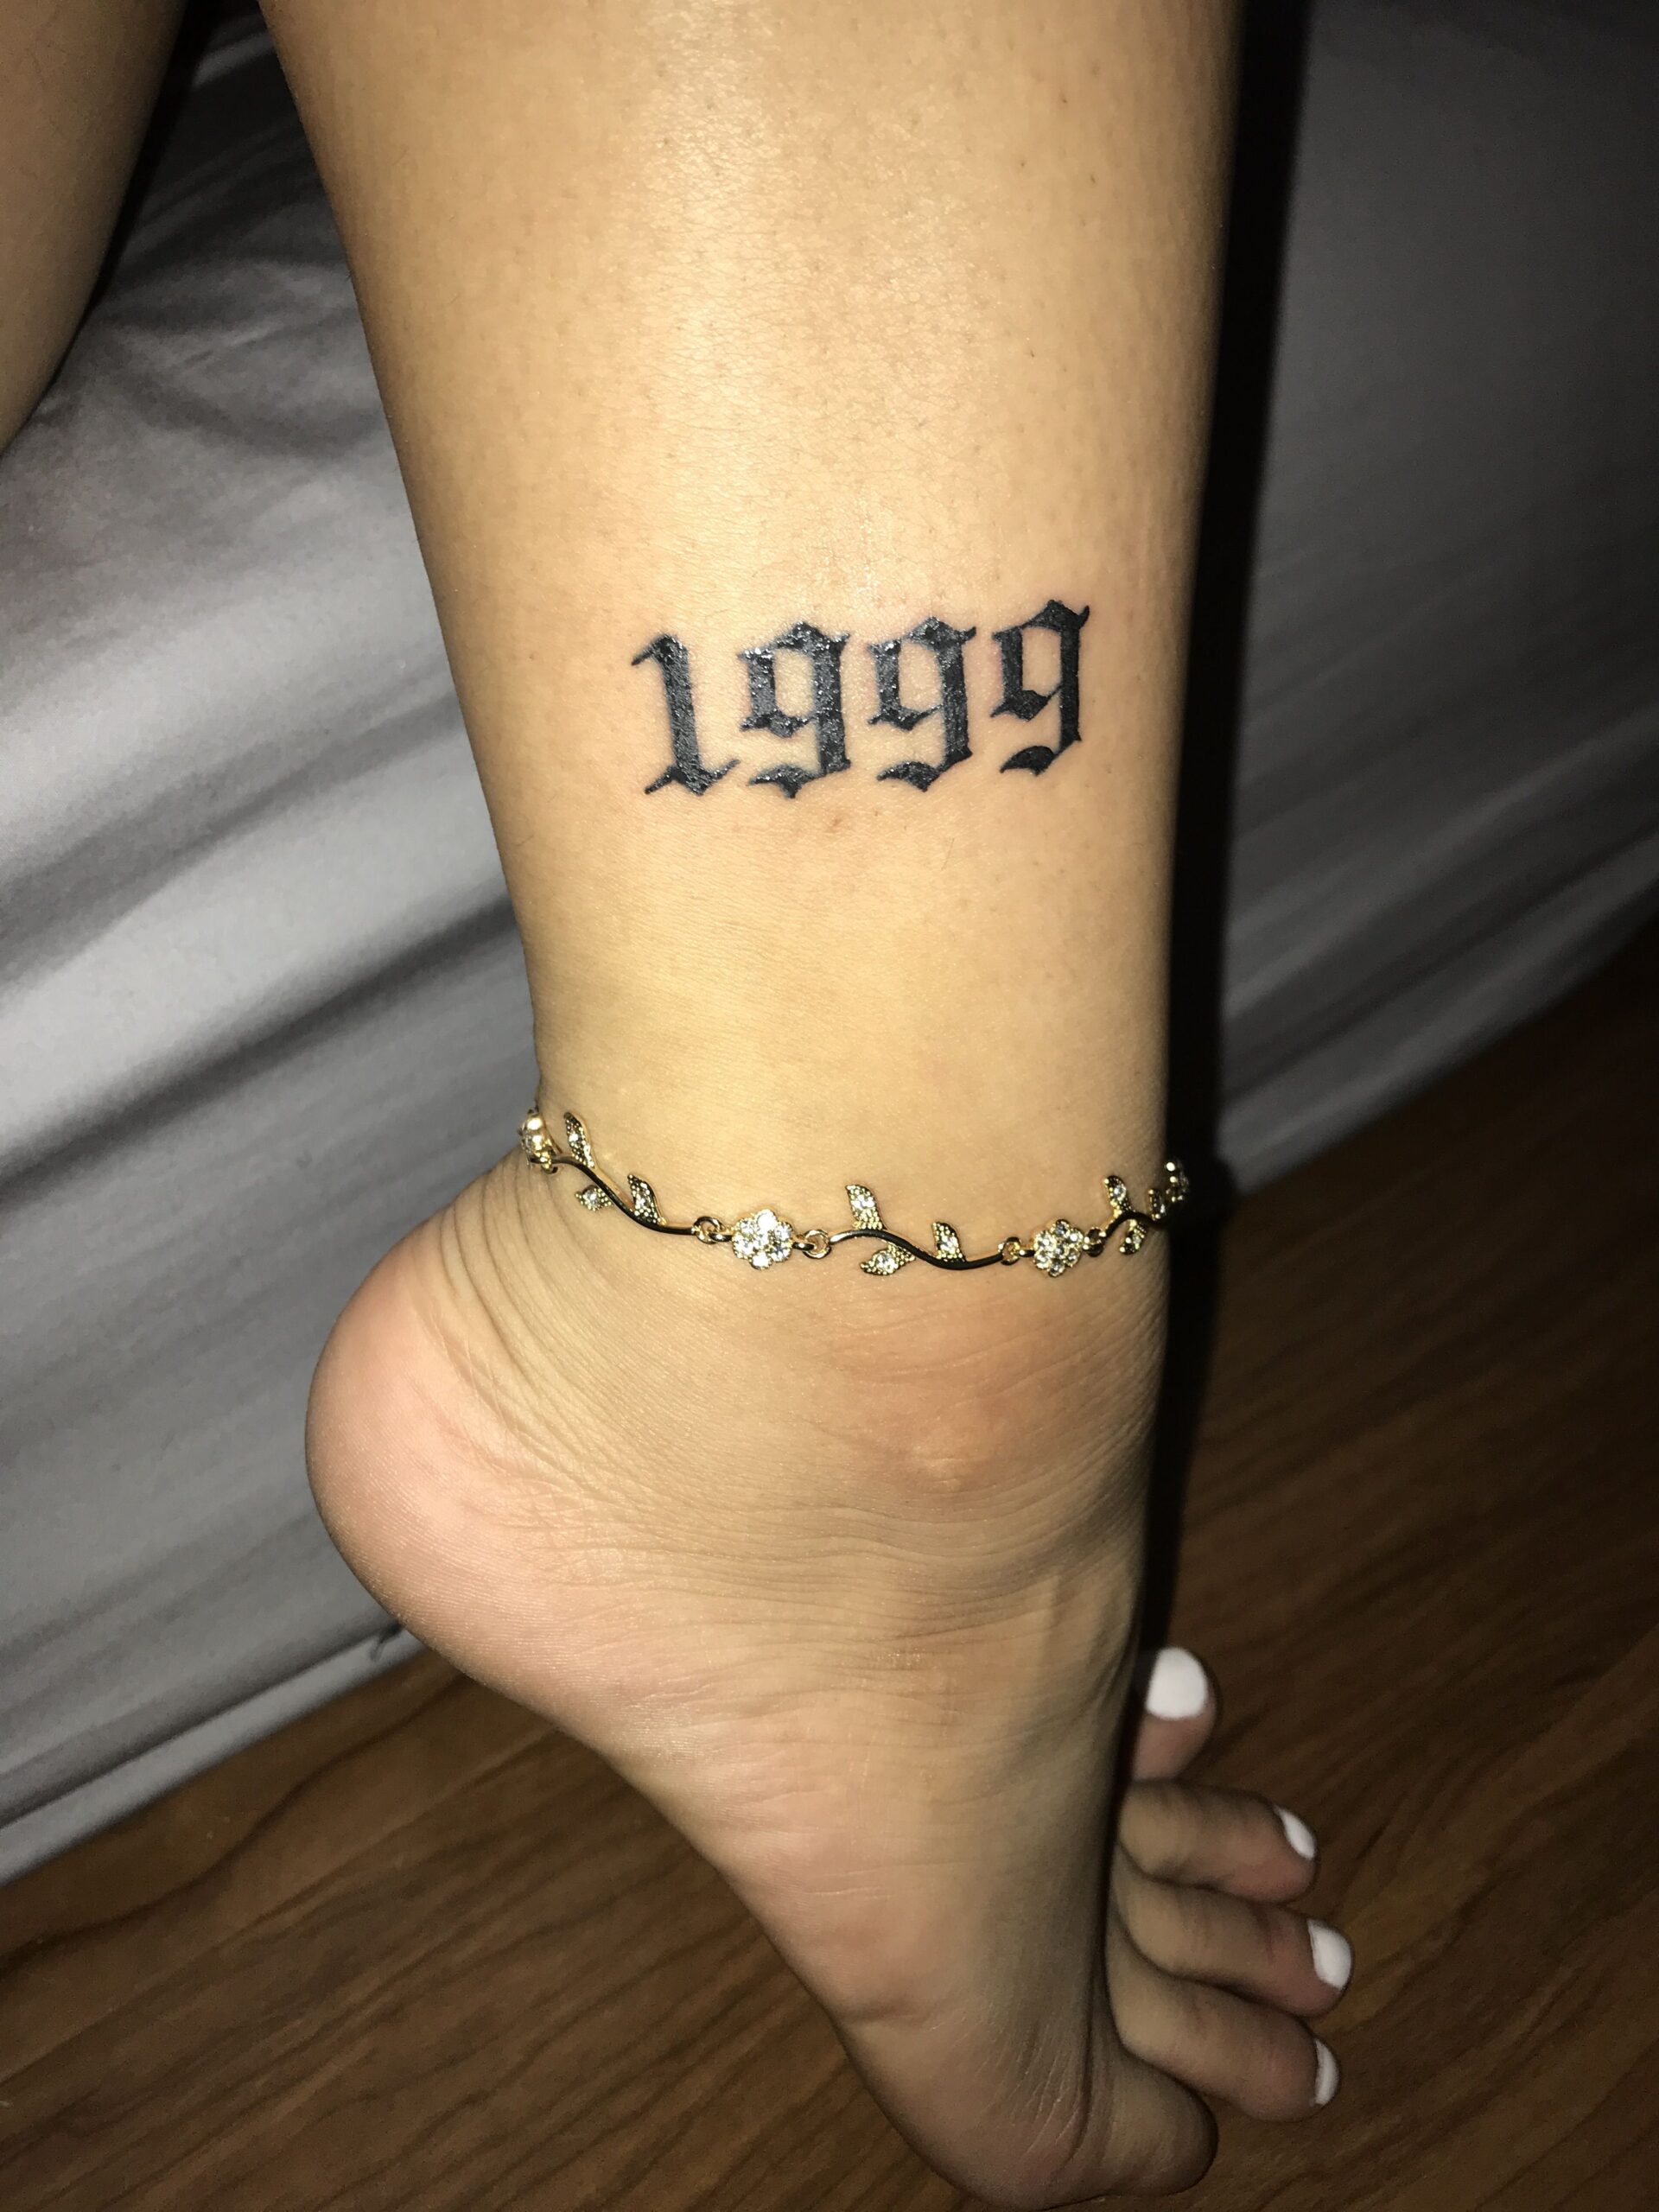 1999 ankle tattoo